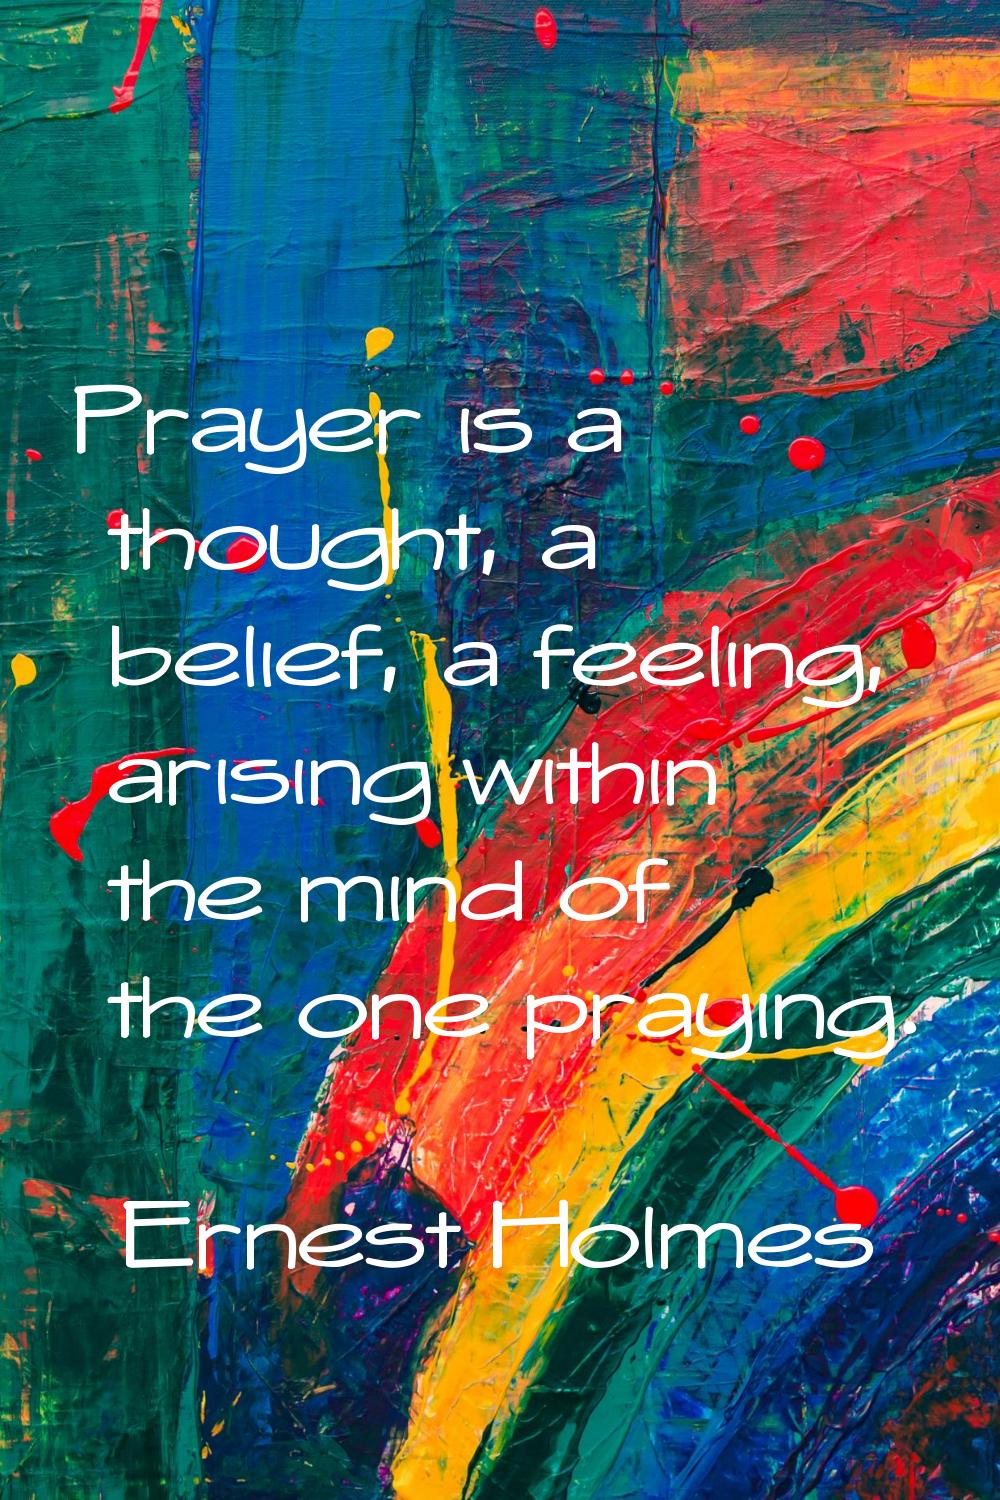 Prayer is a thought, a belief, a feeling, arising within the mind of the one praying.